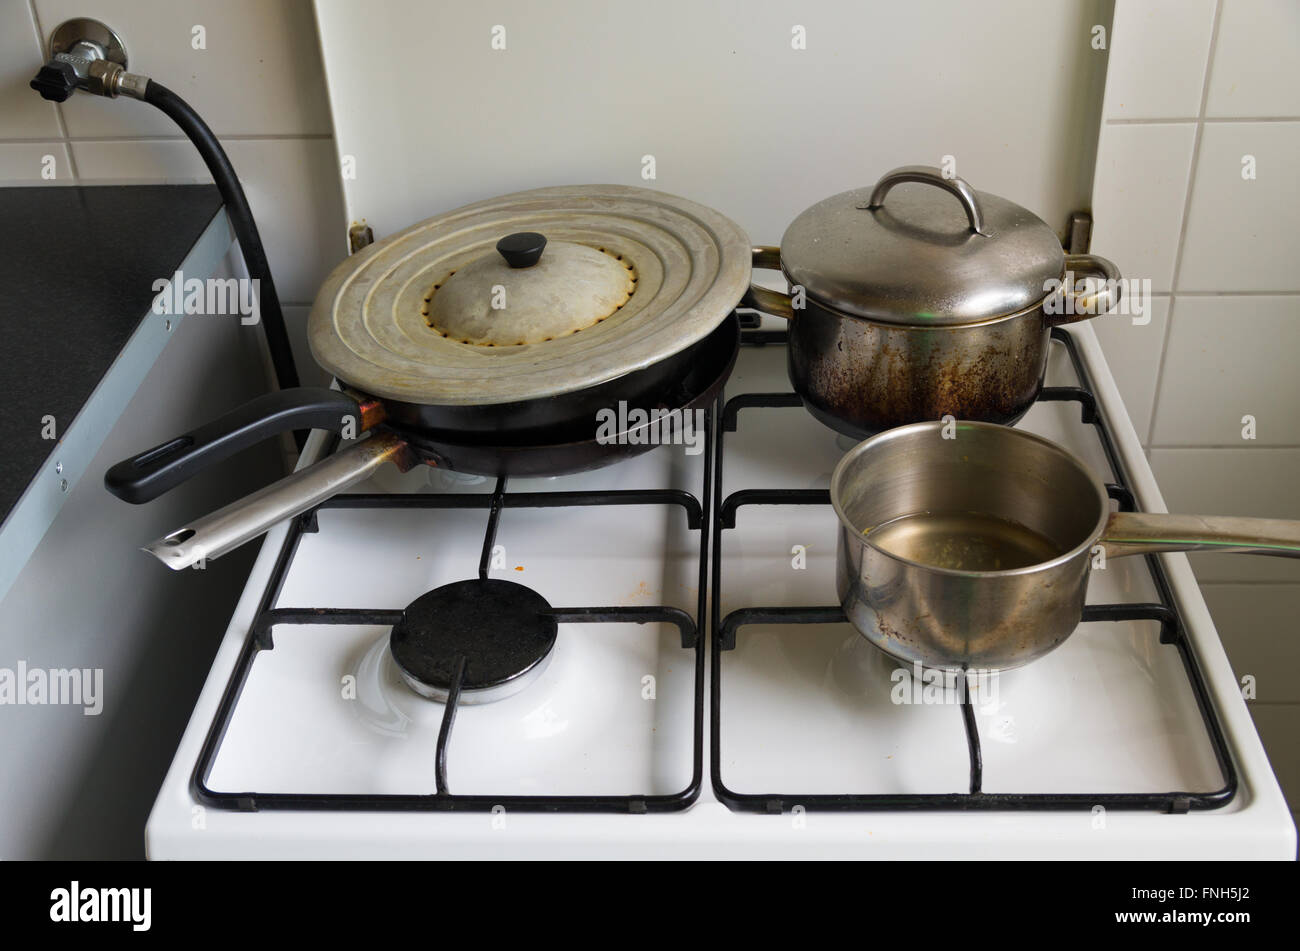 pans and pots on a gas cooker Stock Photo